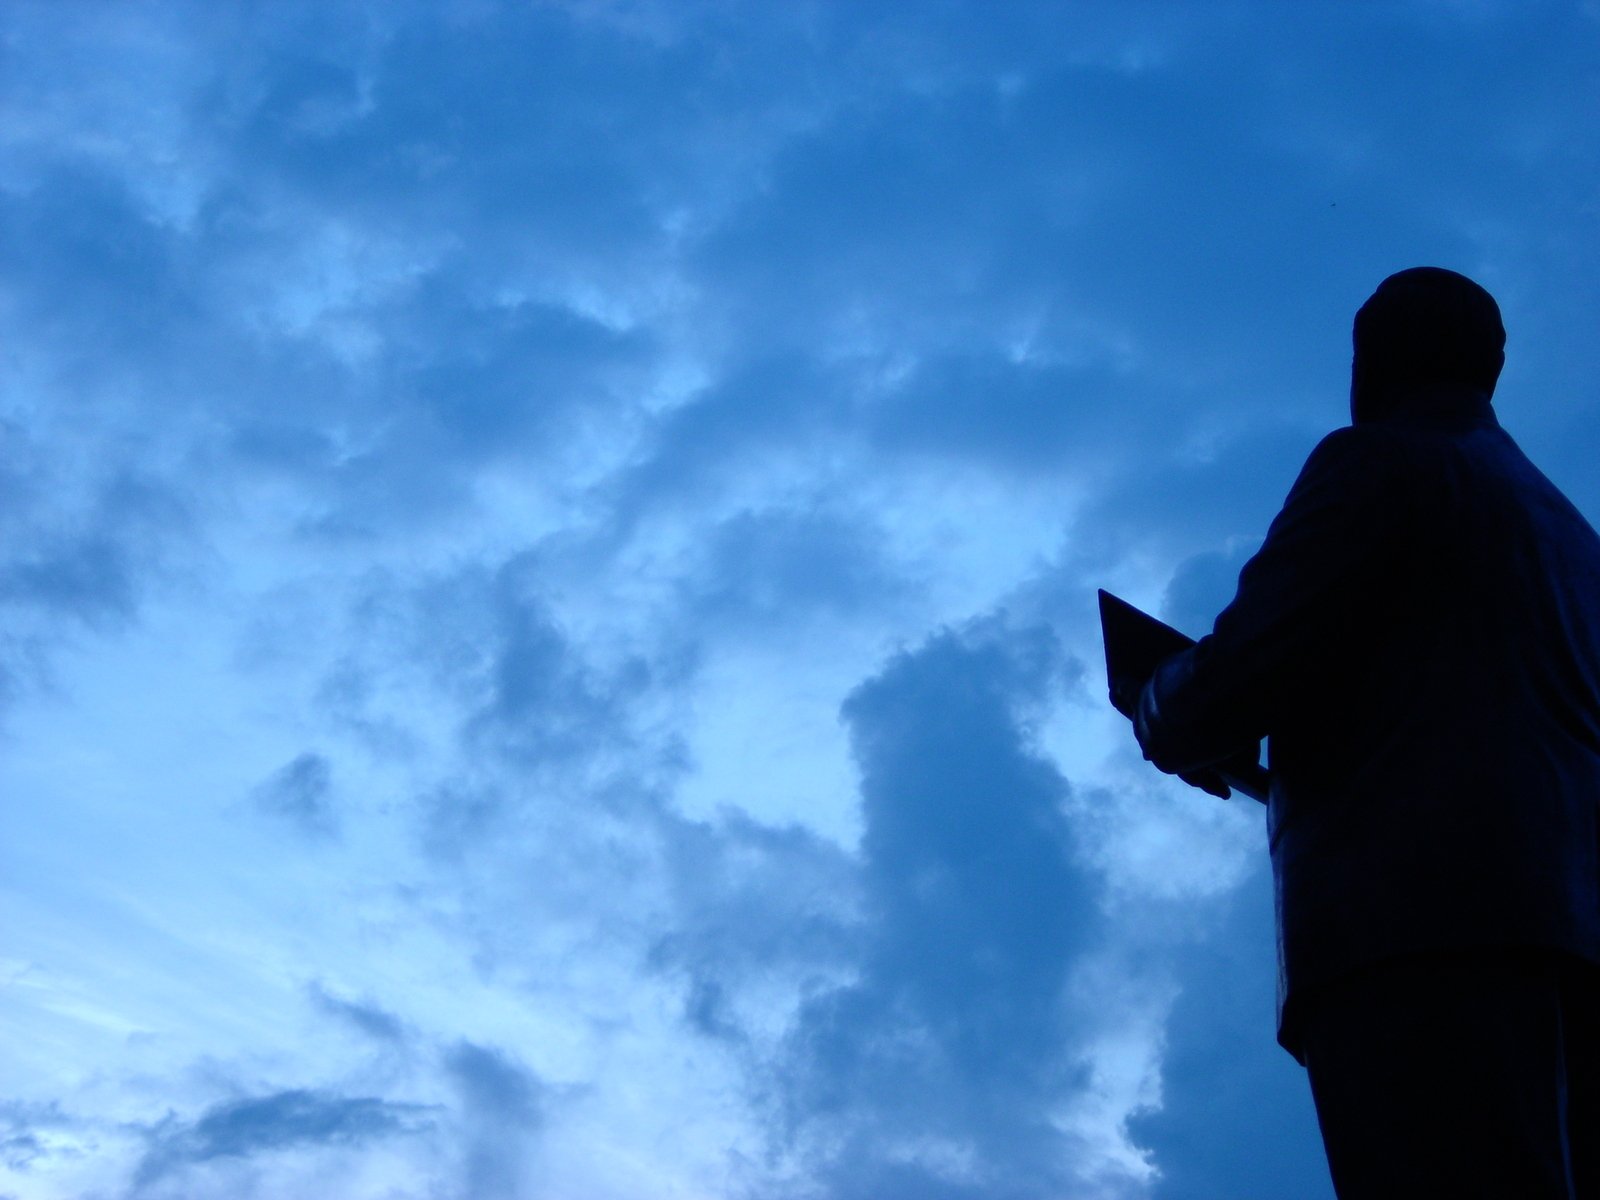 the silhouette of a person standing under a cloudy sky